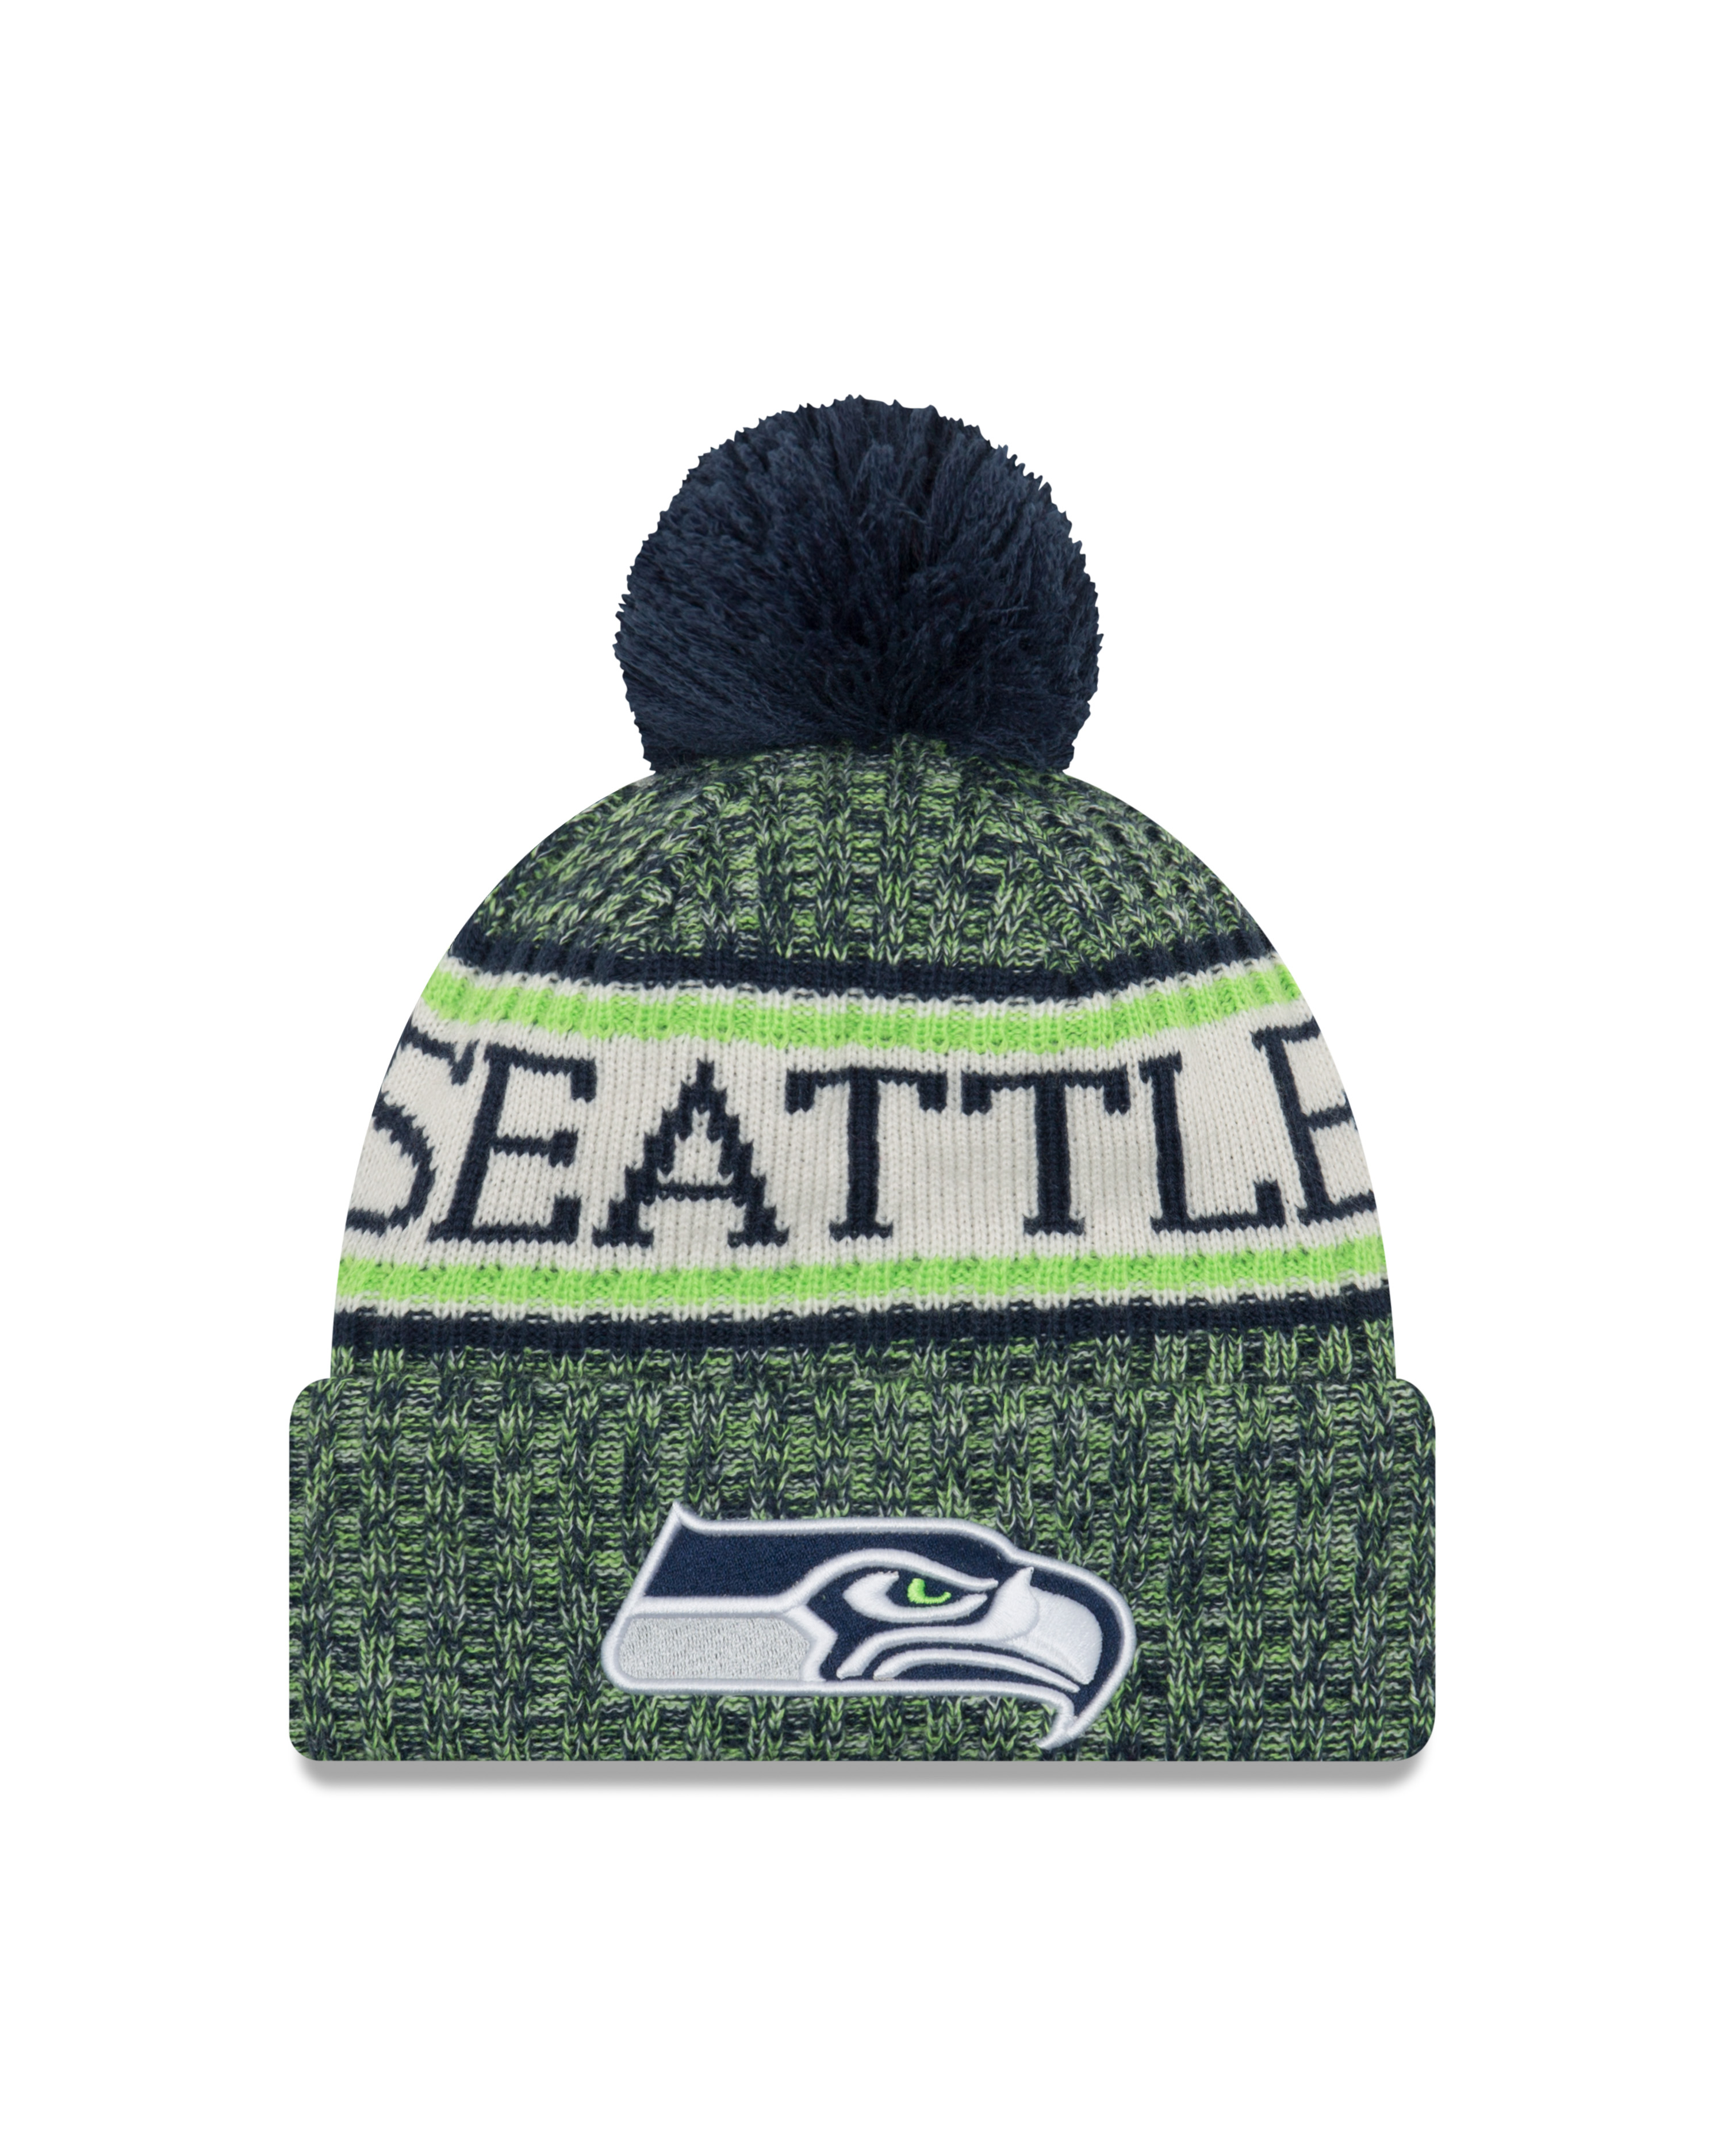 New Era Official NFL Cold Weather Collection #35